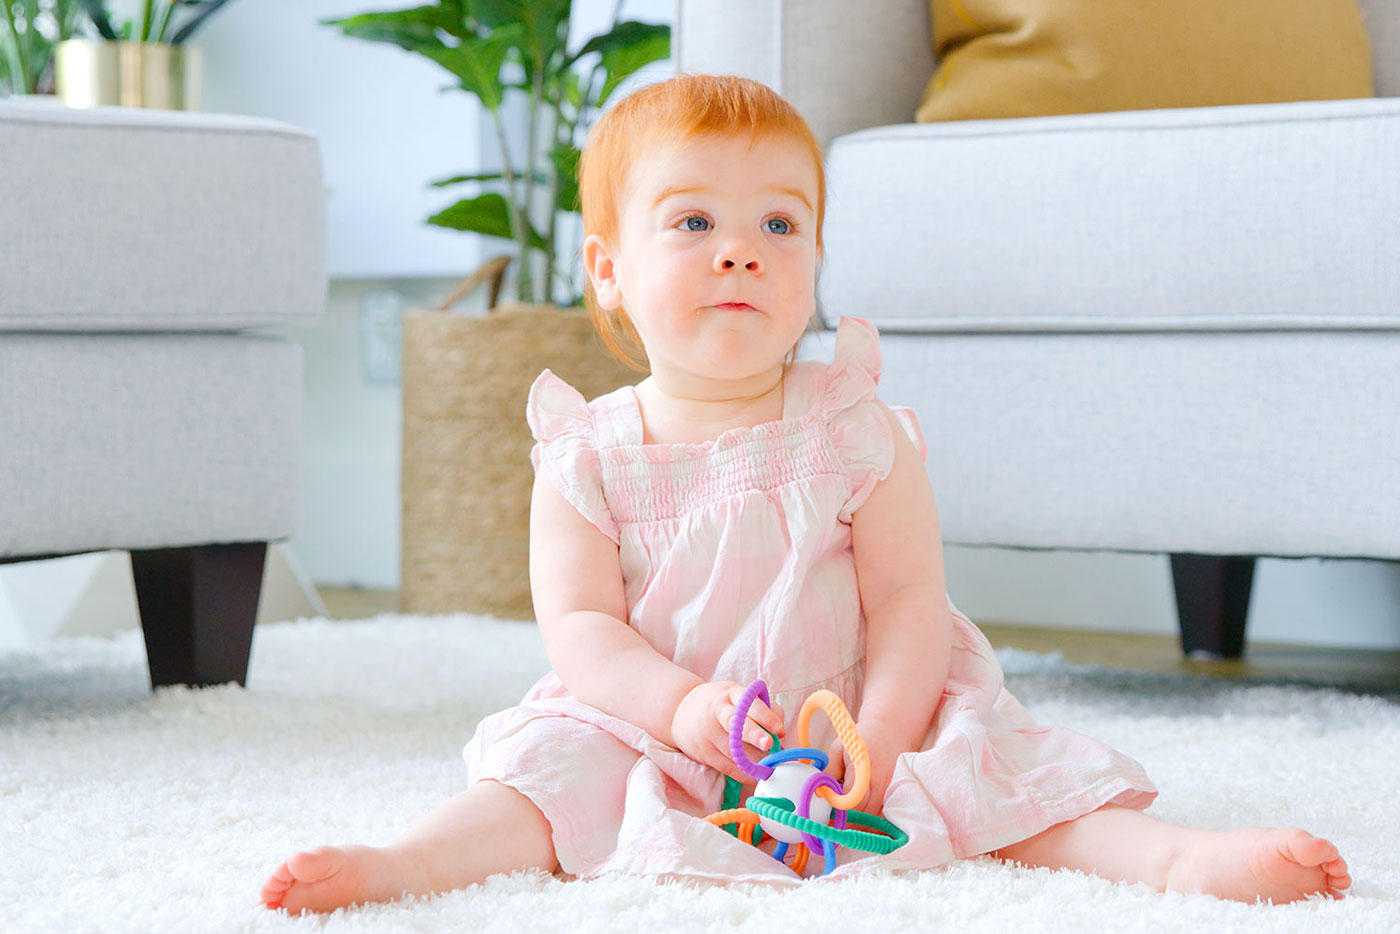 The Essential Role of Play in Child Development